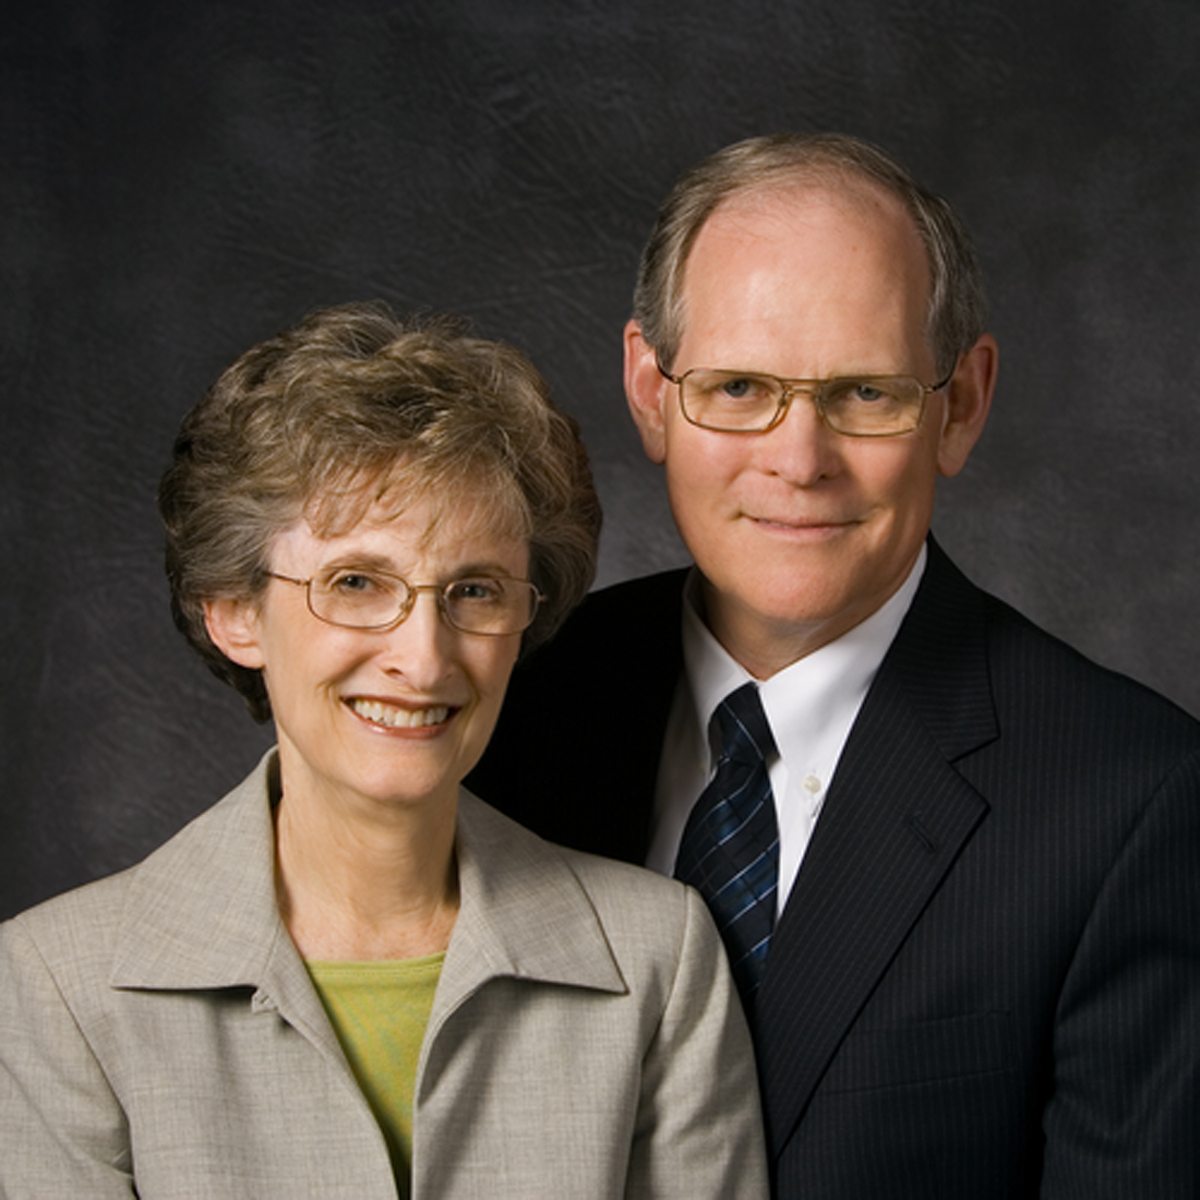 MTC President and his wife